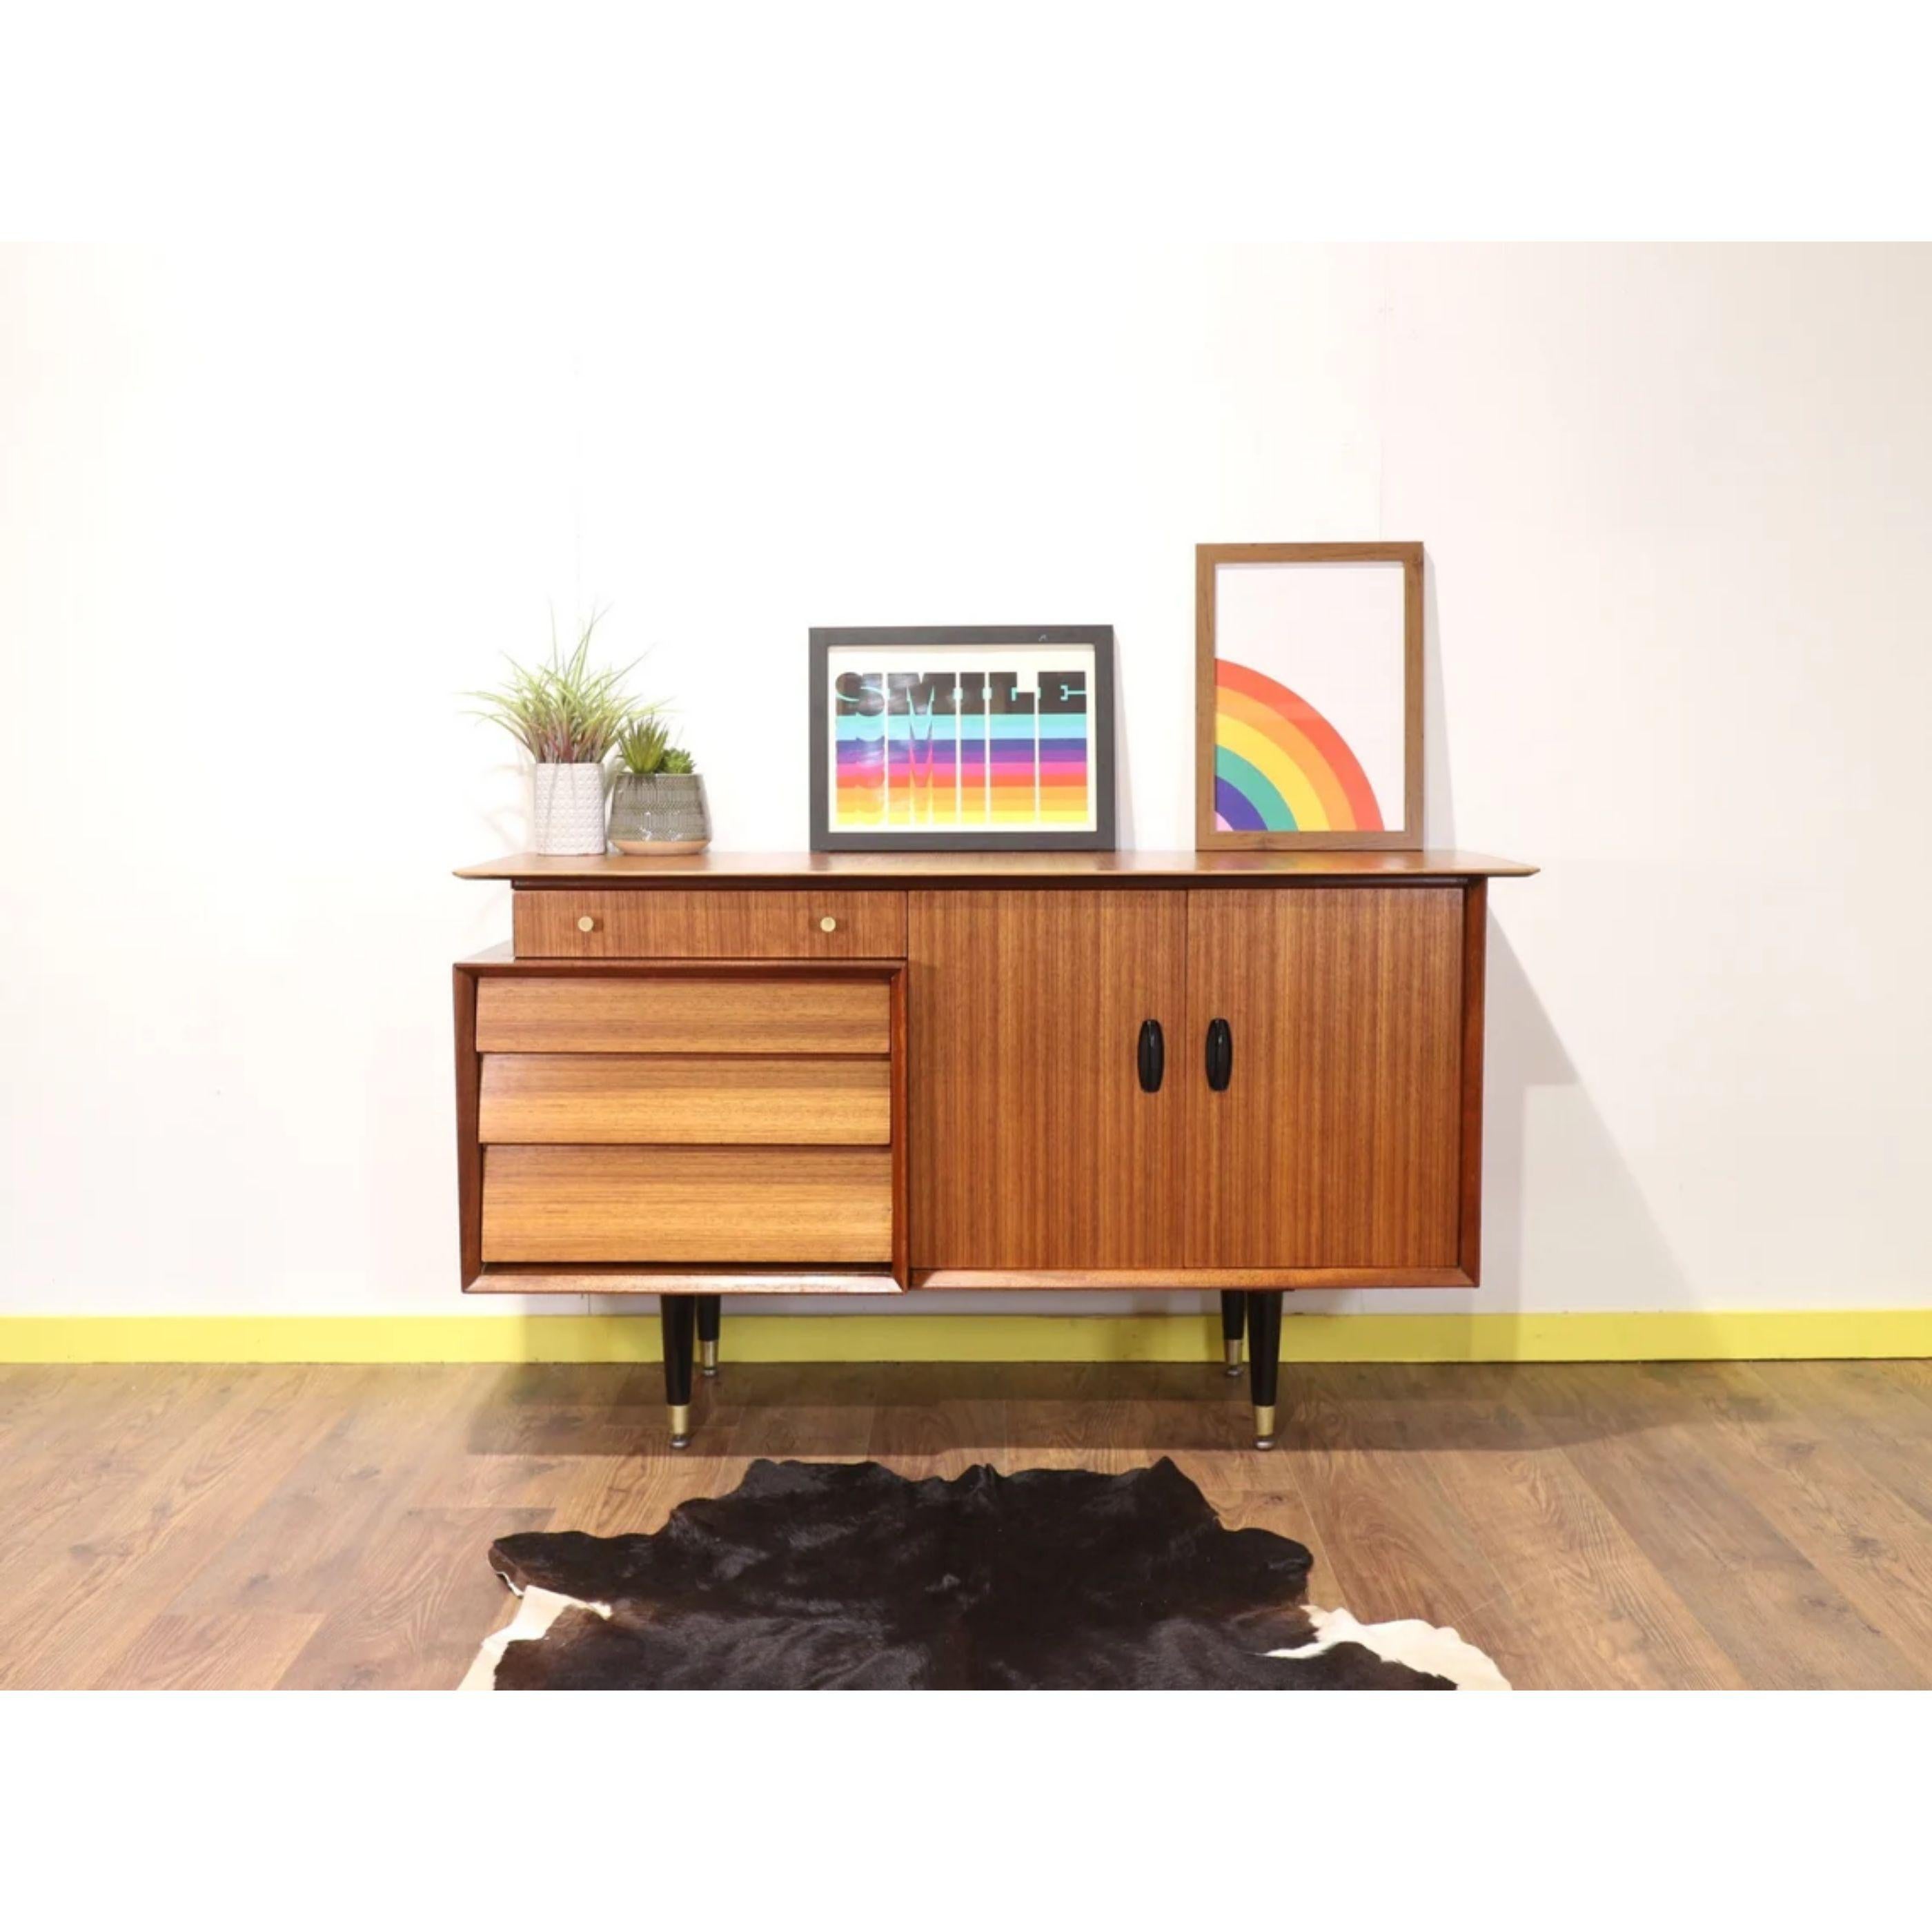 A fantastic, stylish credenza by renowned British furniture maker Beautility. A gorgeous statement piece of furniture that would look great in any room. There is plenty of storage and it can be used for a variety of purposes

Dims

w57 d18.5